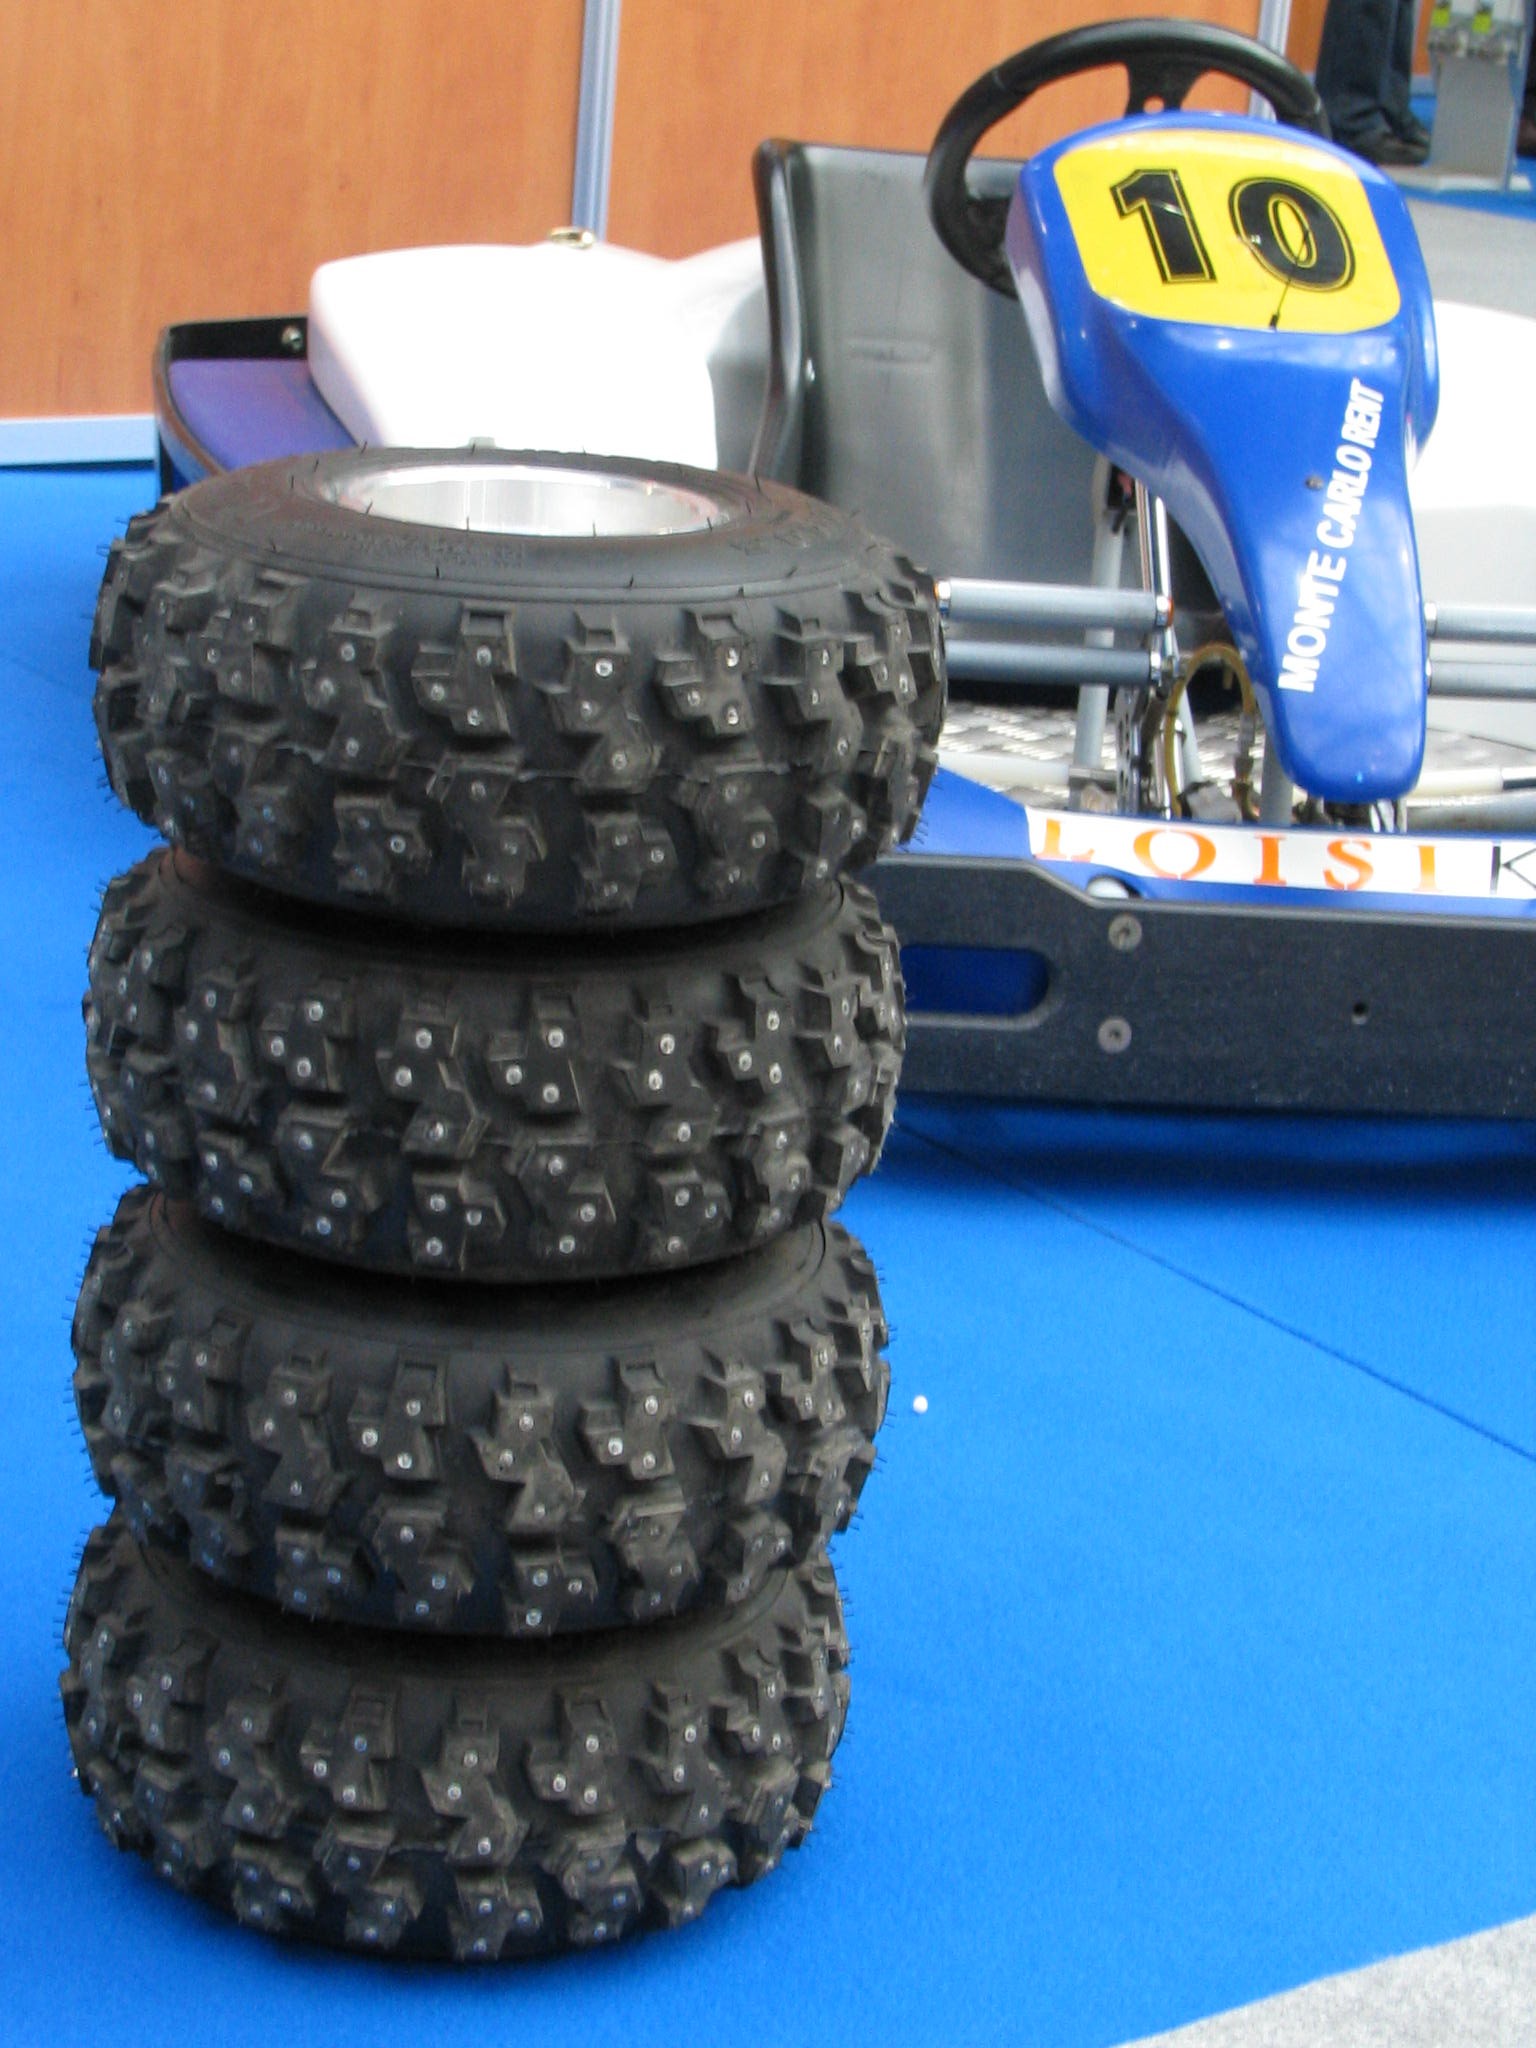 Karting tires for ice racing.